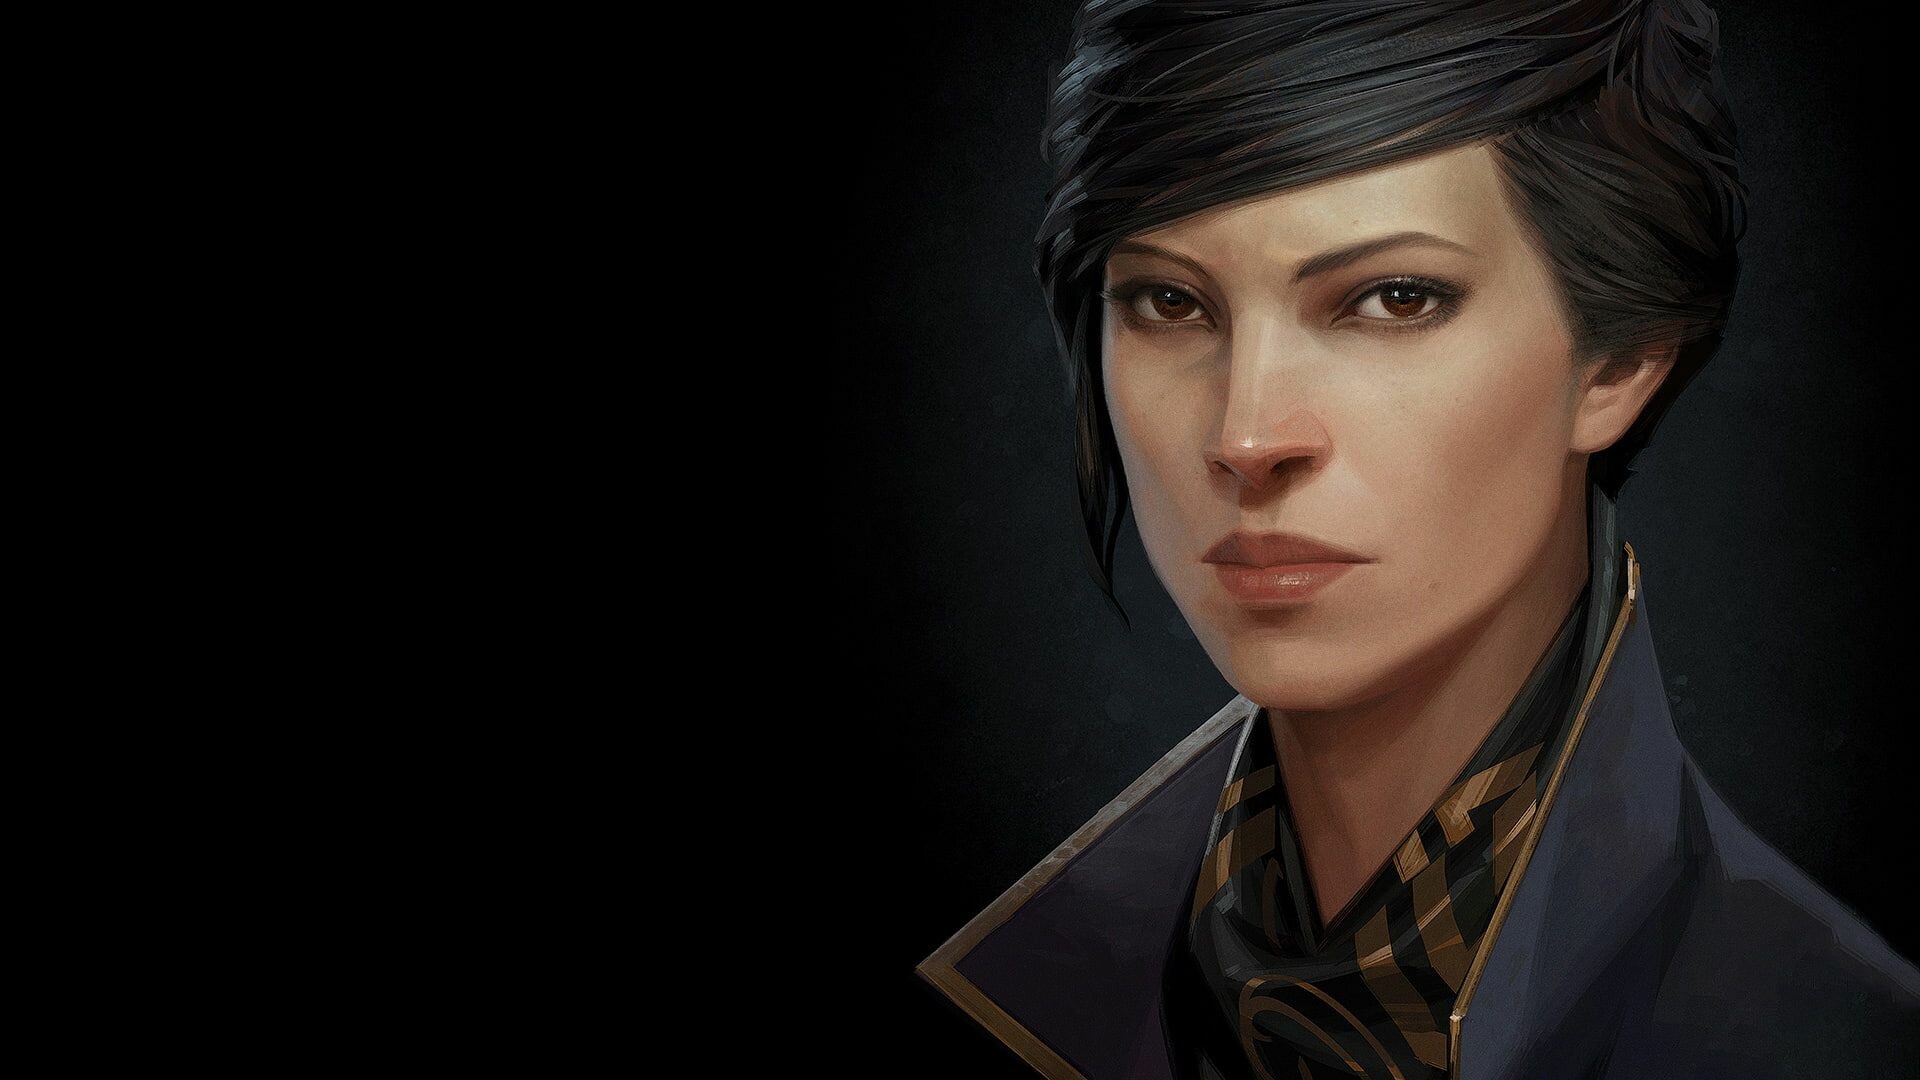 Dishonored: Emily Kaldwin, The daughter of the Empress of Gristol. 1920x1080 Full HD Wallpaper.